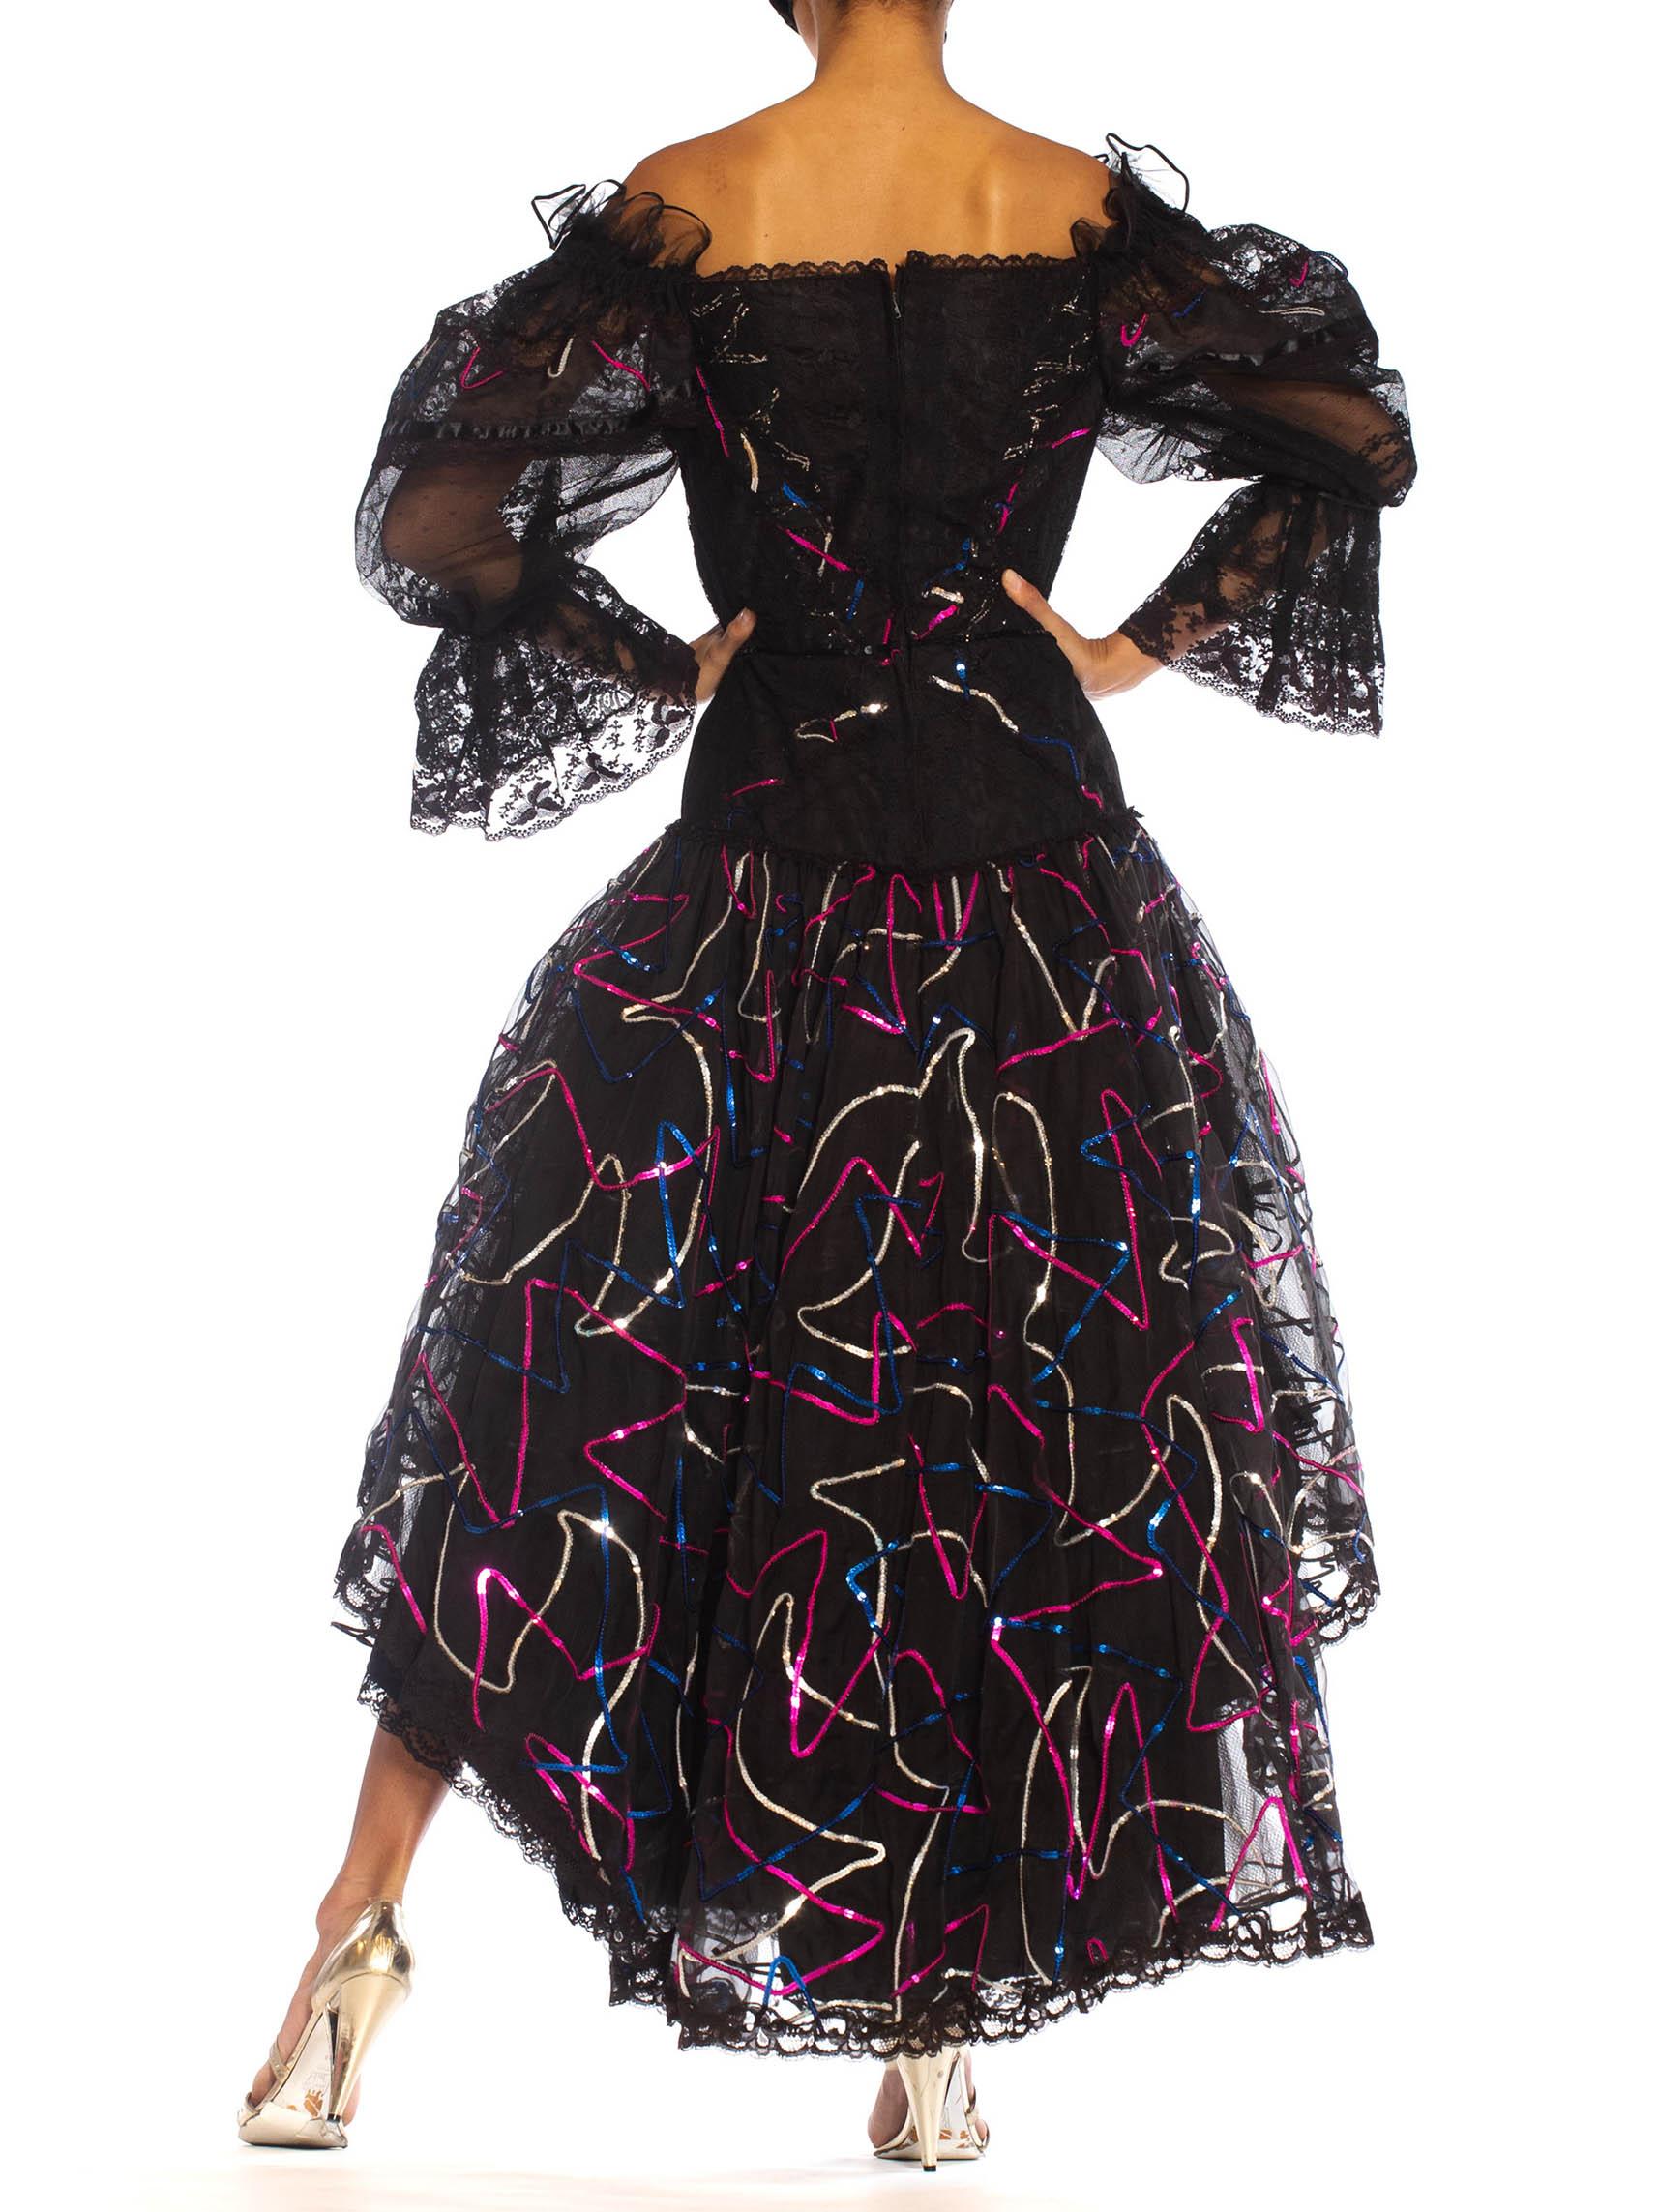 1980S PAT KERR LONDON Black Lace & Sequined Silk Organza High-Low Gown For Sale 3